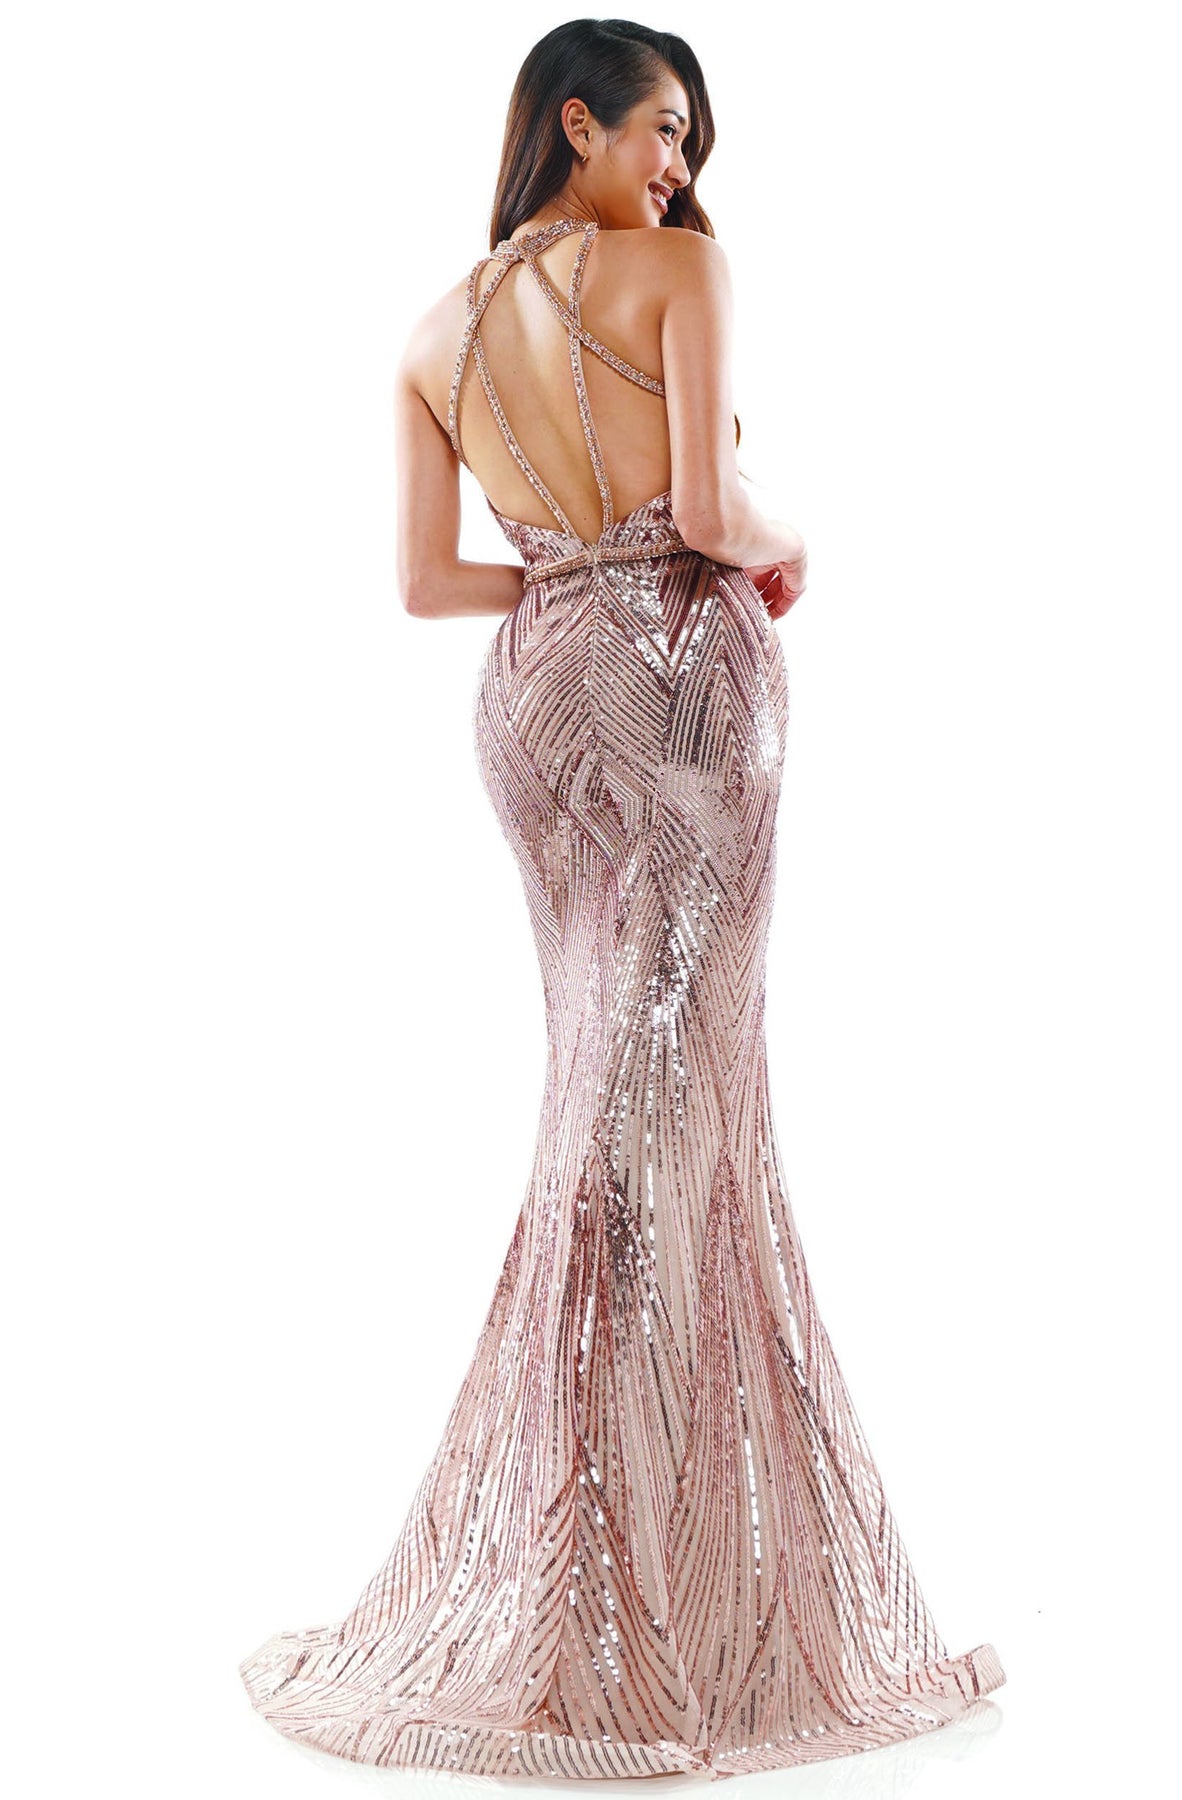 Glow Dress - G908 Sequined Chevron Motif High Halter Gown In Pink and Gold